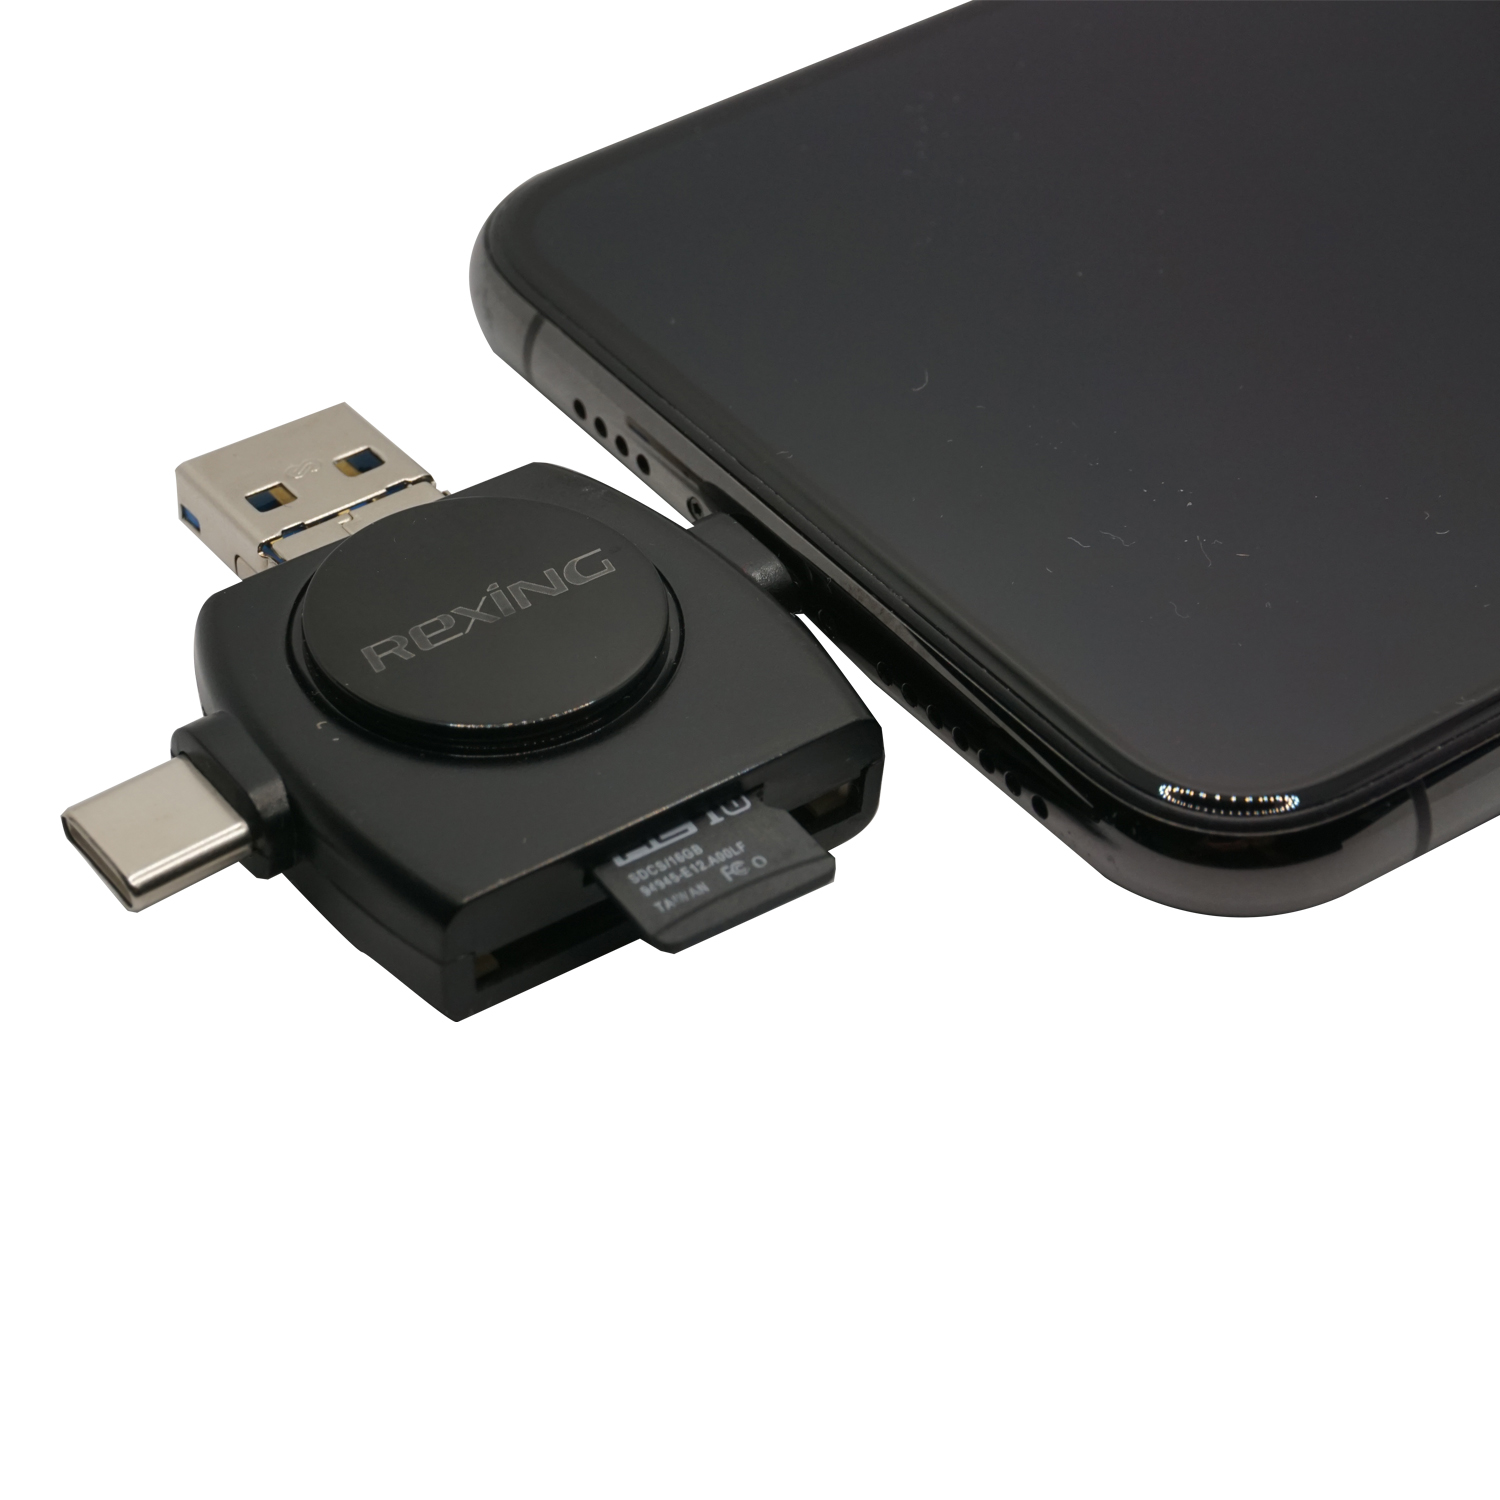 Rexing Card Viewer 4-in-1 SD Card Reader